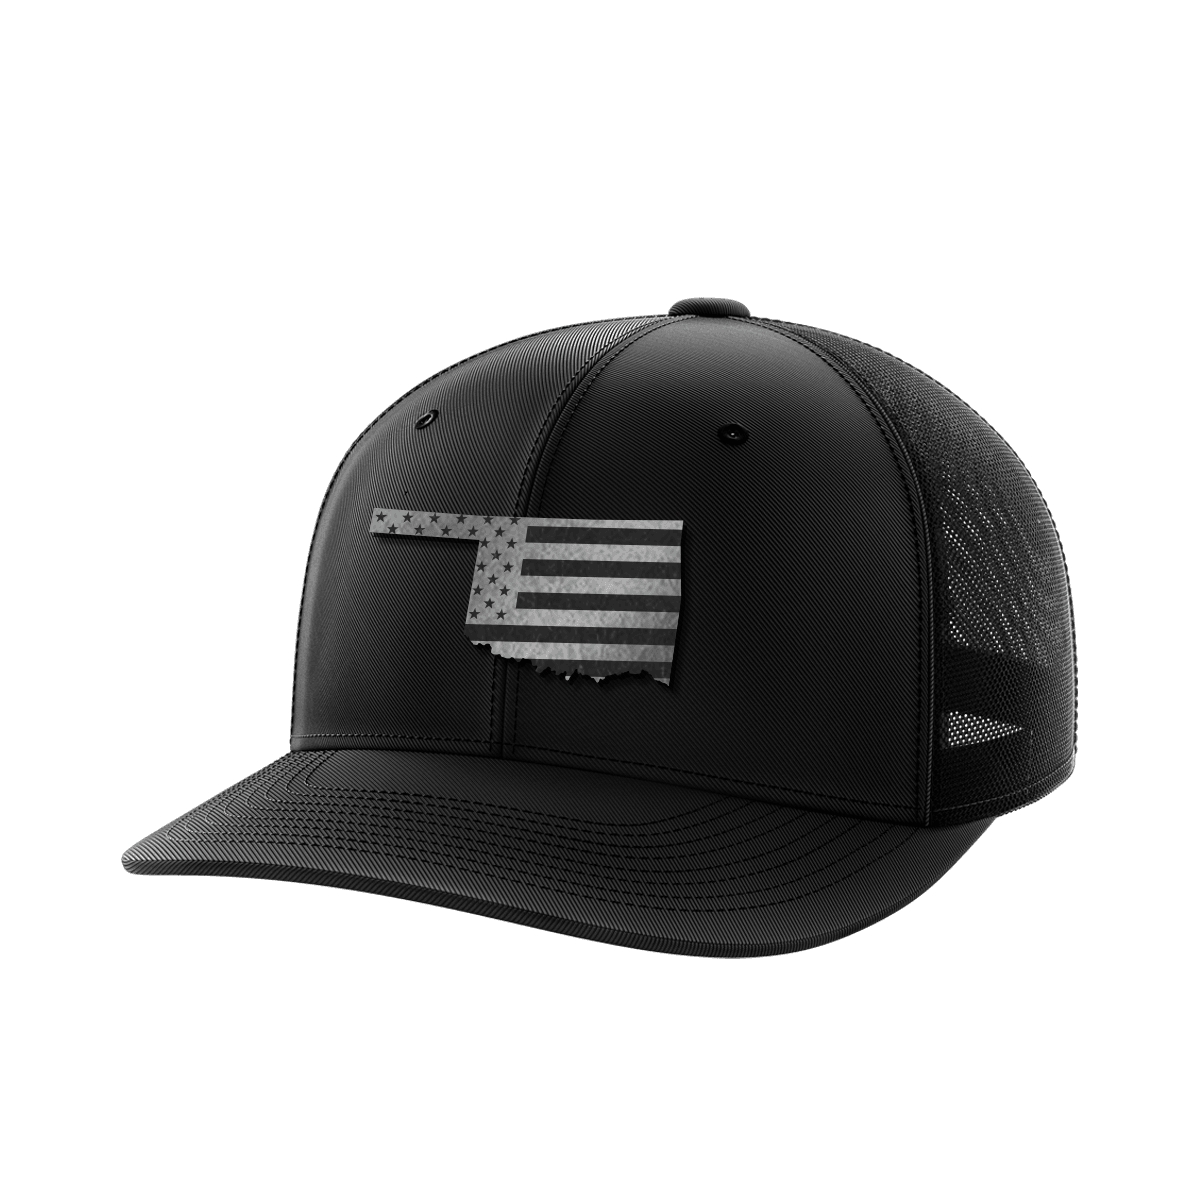 Oklahoma United Collection (black leather) - Greater Half